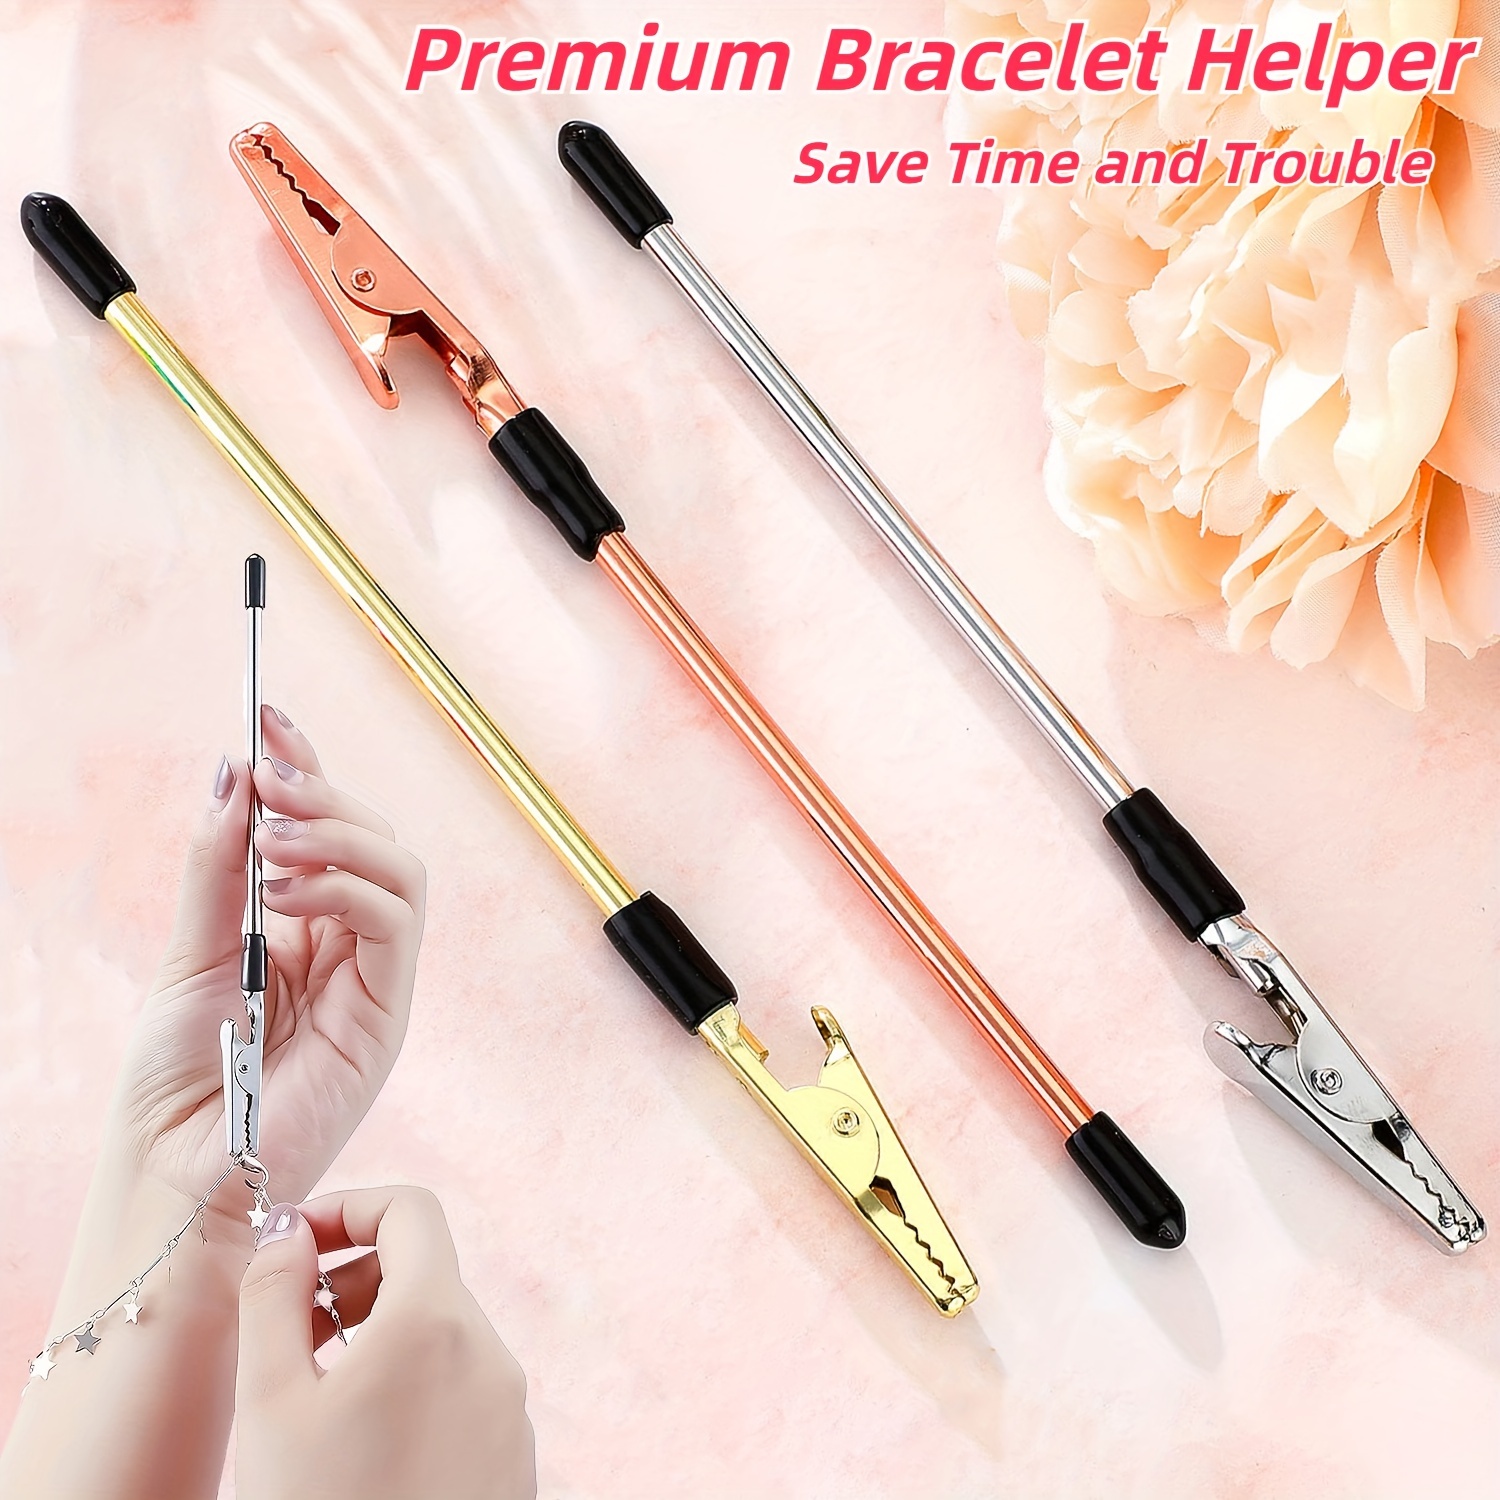 1 or 3 Pieces Bracelet Helper Tool - Fastener Helper Tool for Bracelet,  Necklace, Jewelry, Watch - Clasp Helper - Portable, Easy-to-Use, Made of  Metal